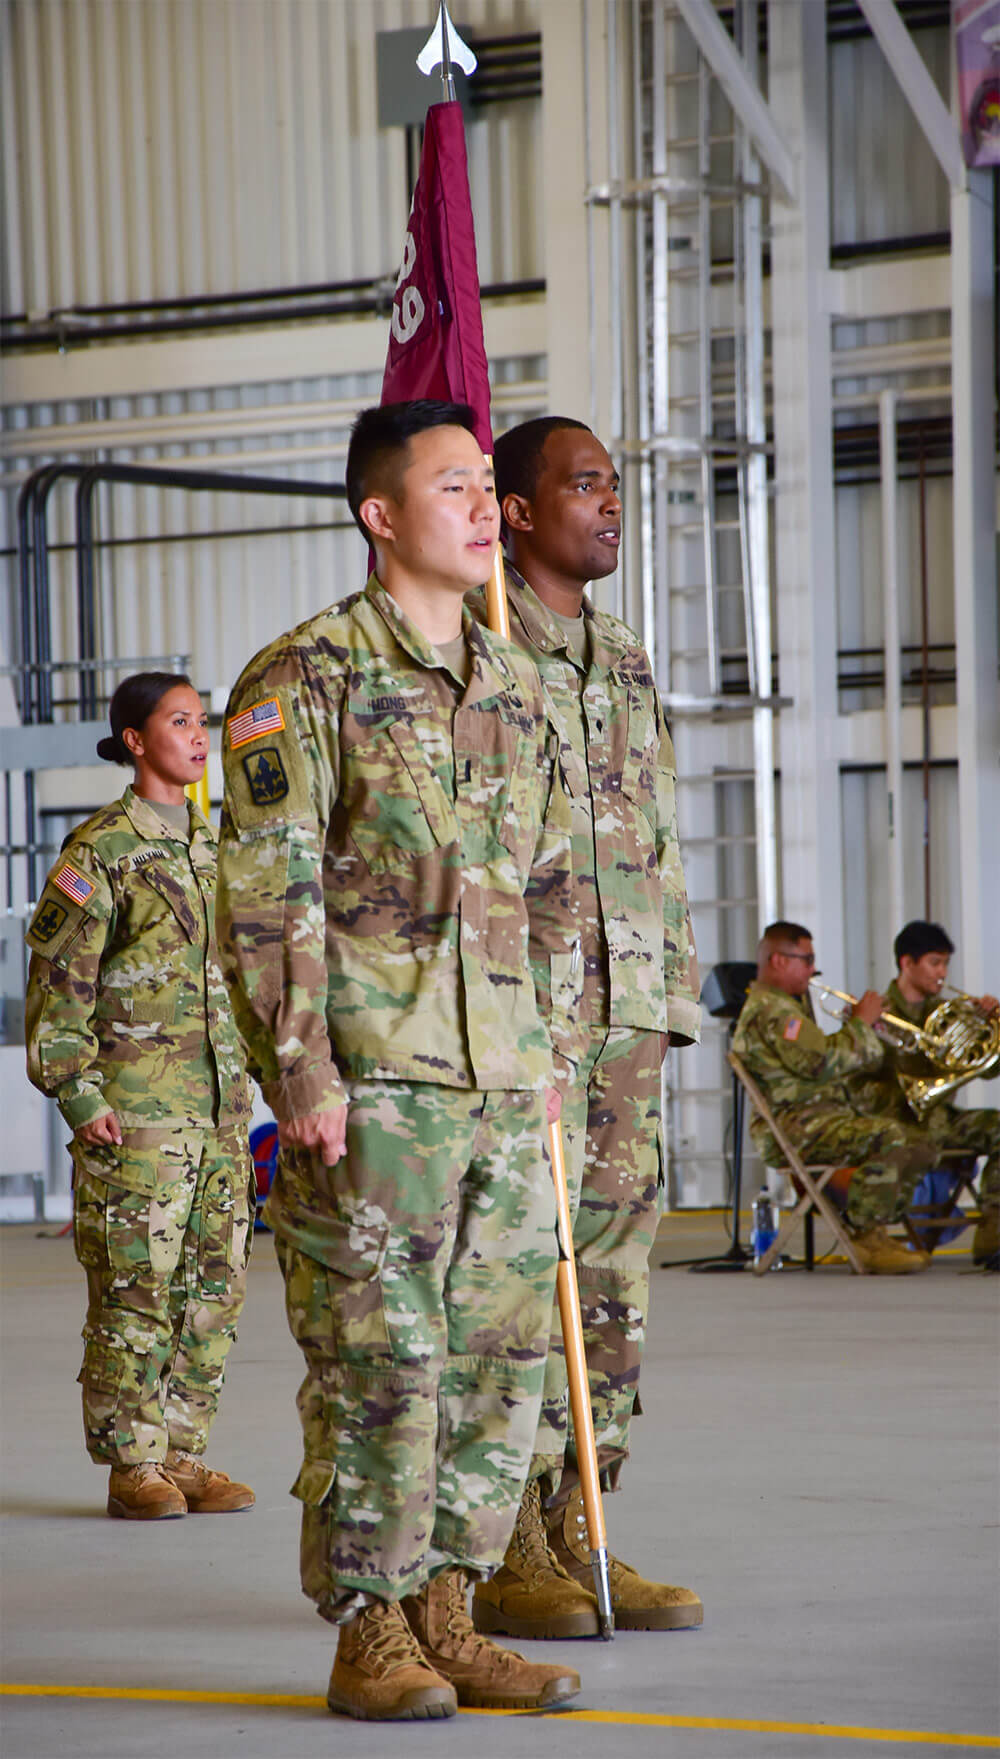 Soldiers of Detachment 1, Company Golf, 1st Battalion, 189th Aviation Regiment, Hawaii Army National Guard, participate in a deployment ceremony at the Kalaeloa Army Aviation Support Facility, June 16, 2018. Hawaii Army National Guard photo by SFC Theresa Gualdarama